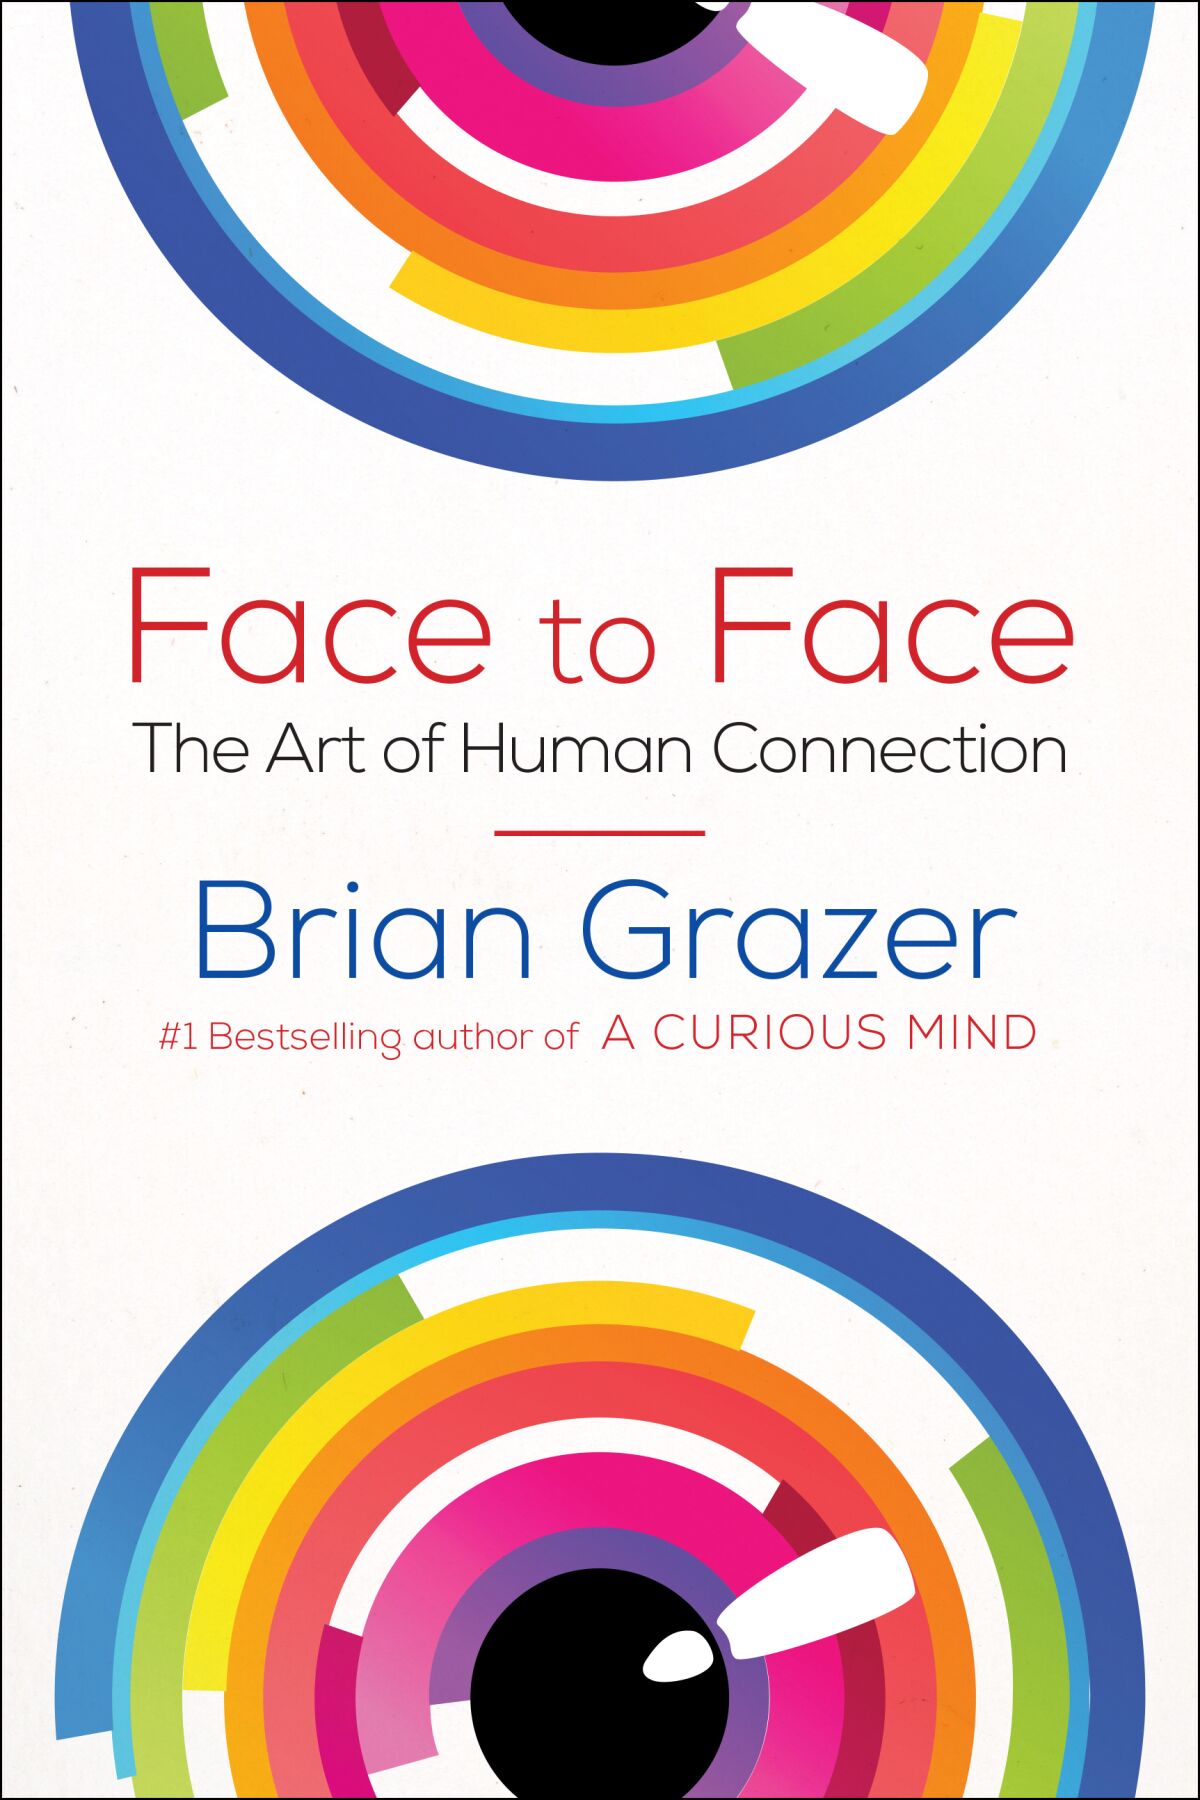 'Face to Face' by Brian Grazer